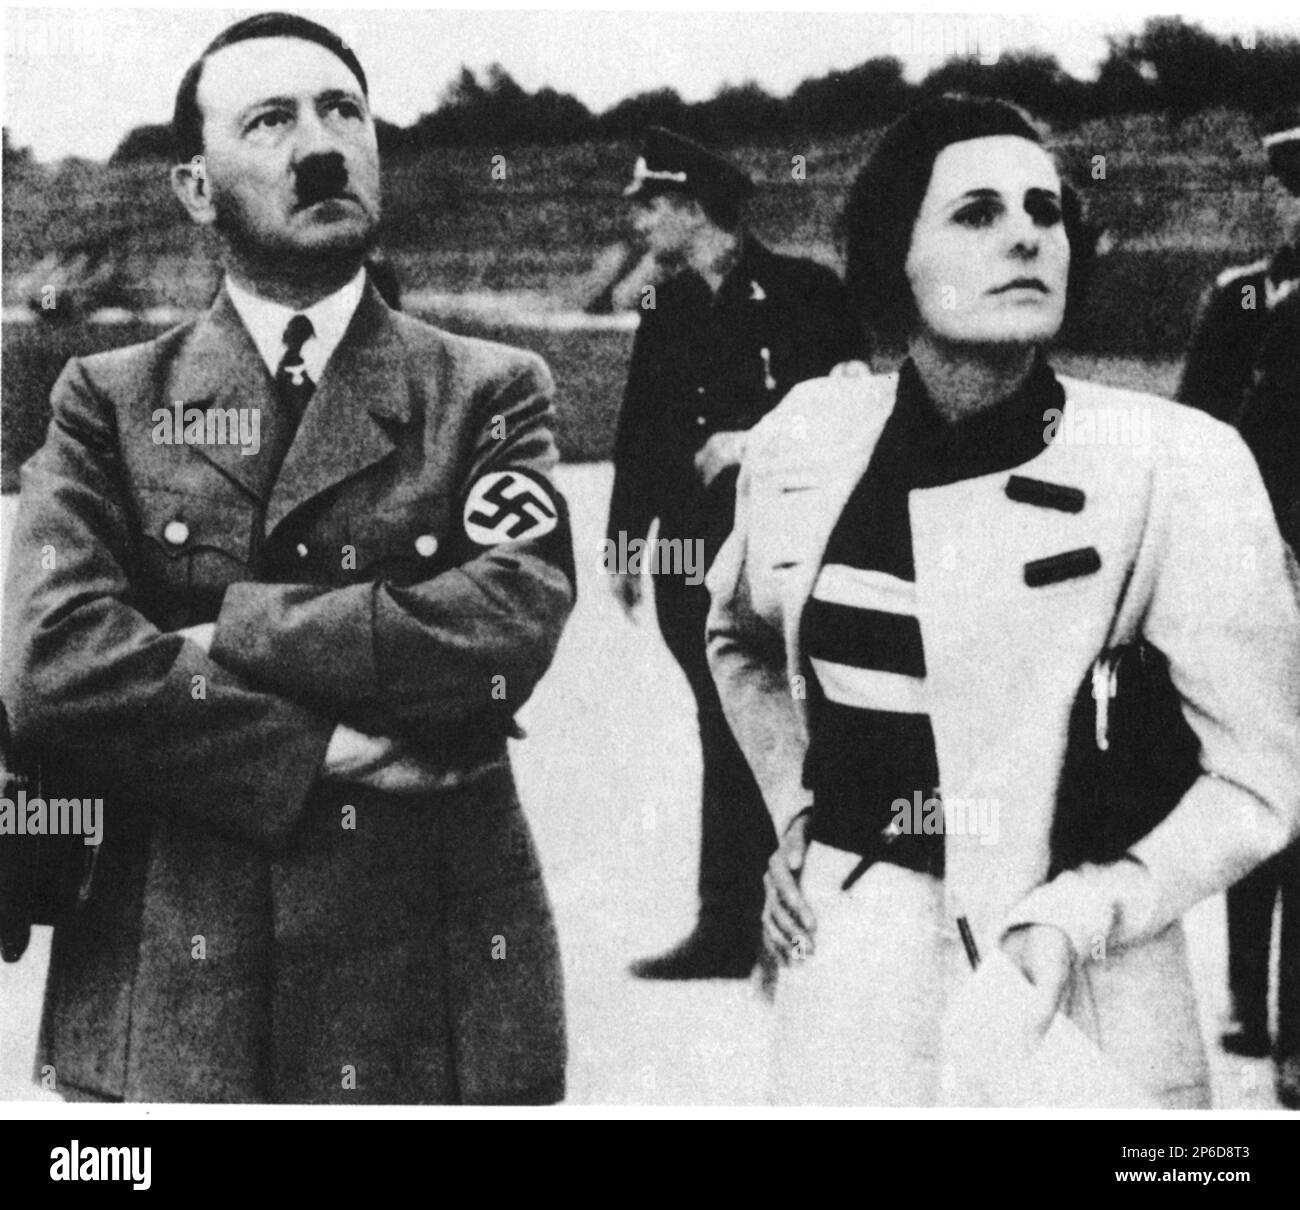 1934 , BERLIN , GERMANY : LENI RIEFENSTAHL ( 1902 - 2003 ) german actress and woman movie director with dictator ADOLF HITLER discussing the preparations for the Sixth days Nazist Party Rally in Nuremberg . From this event Leni Riefenstahl filming the most celebrated documentary TRIUMPH OF THE WILL ( 1935 - Il trionfo della volontà  ). - NAZI DIVA - NAZIST - NAZISTA - NAZISMO - VAMP - regista cinematografico - ritratto - WWII - SECONDA GUERRA MONDIALE - 2nd World War - documentario - documentarismo ----  Archivio GBB Stock Photo